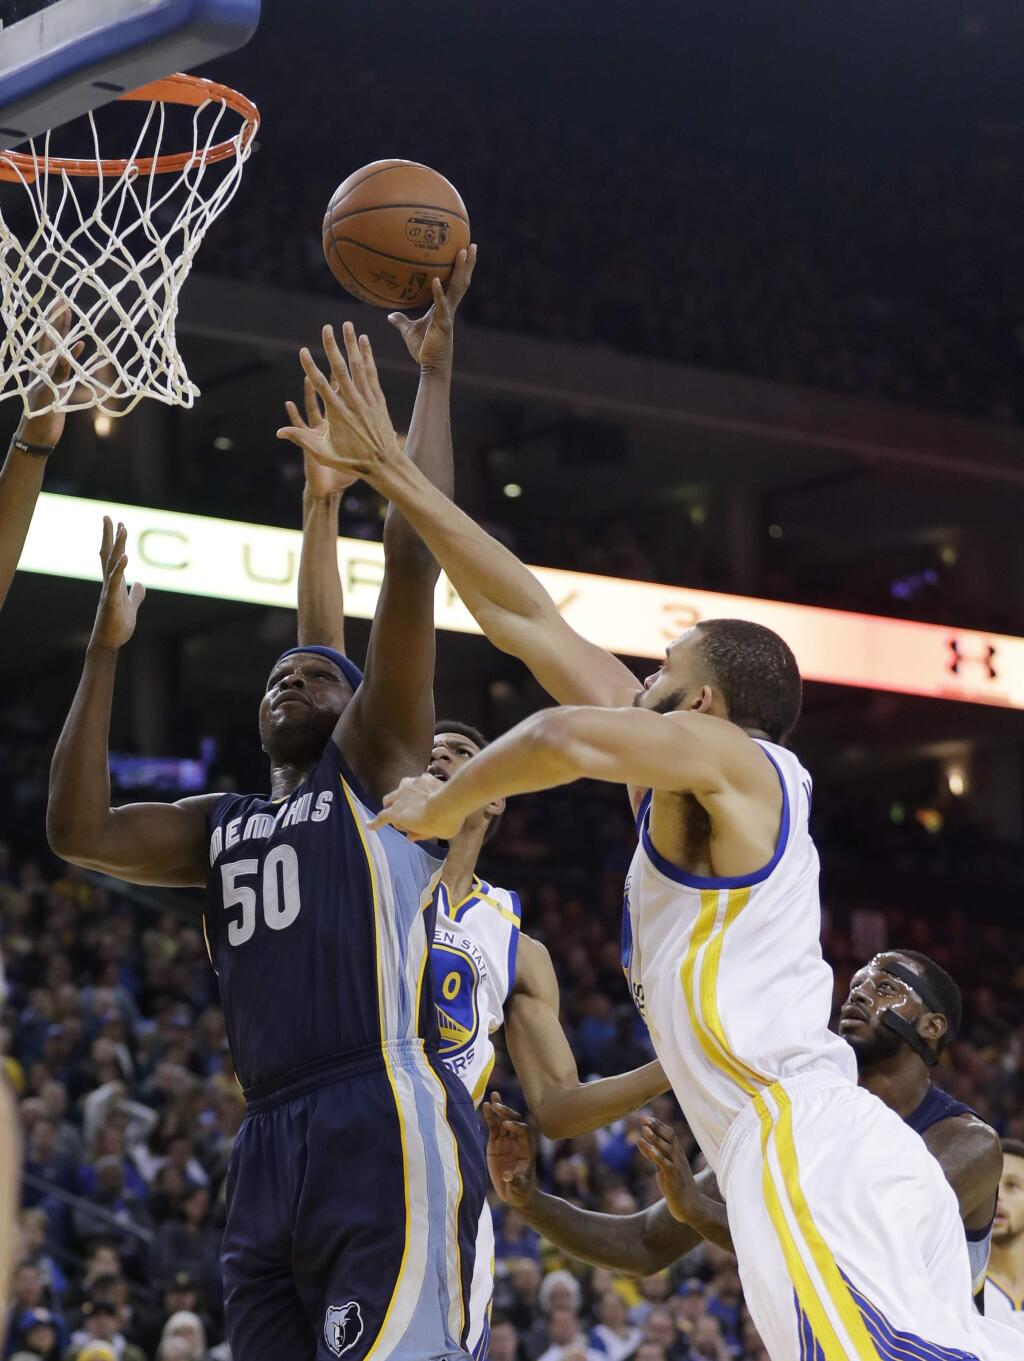 Memphis Grizzlies' Zach Randolph (50) shoots as Golden State Warriors' JaVale McGee, right, closes in during the first half of an NBA basketball game Friday, Jan. 6, 2017, in Oakland, Calif. (AP Photo/Marcio Jose Sanchez)